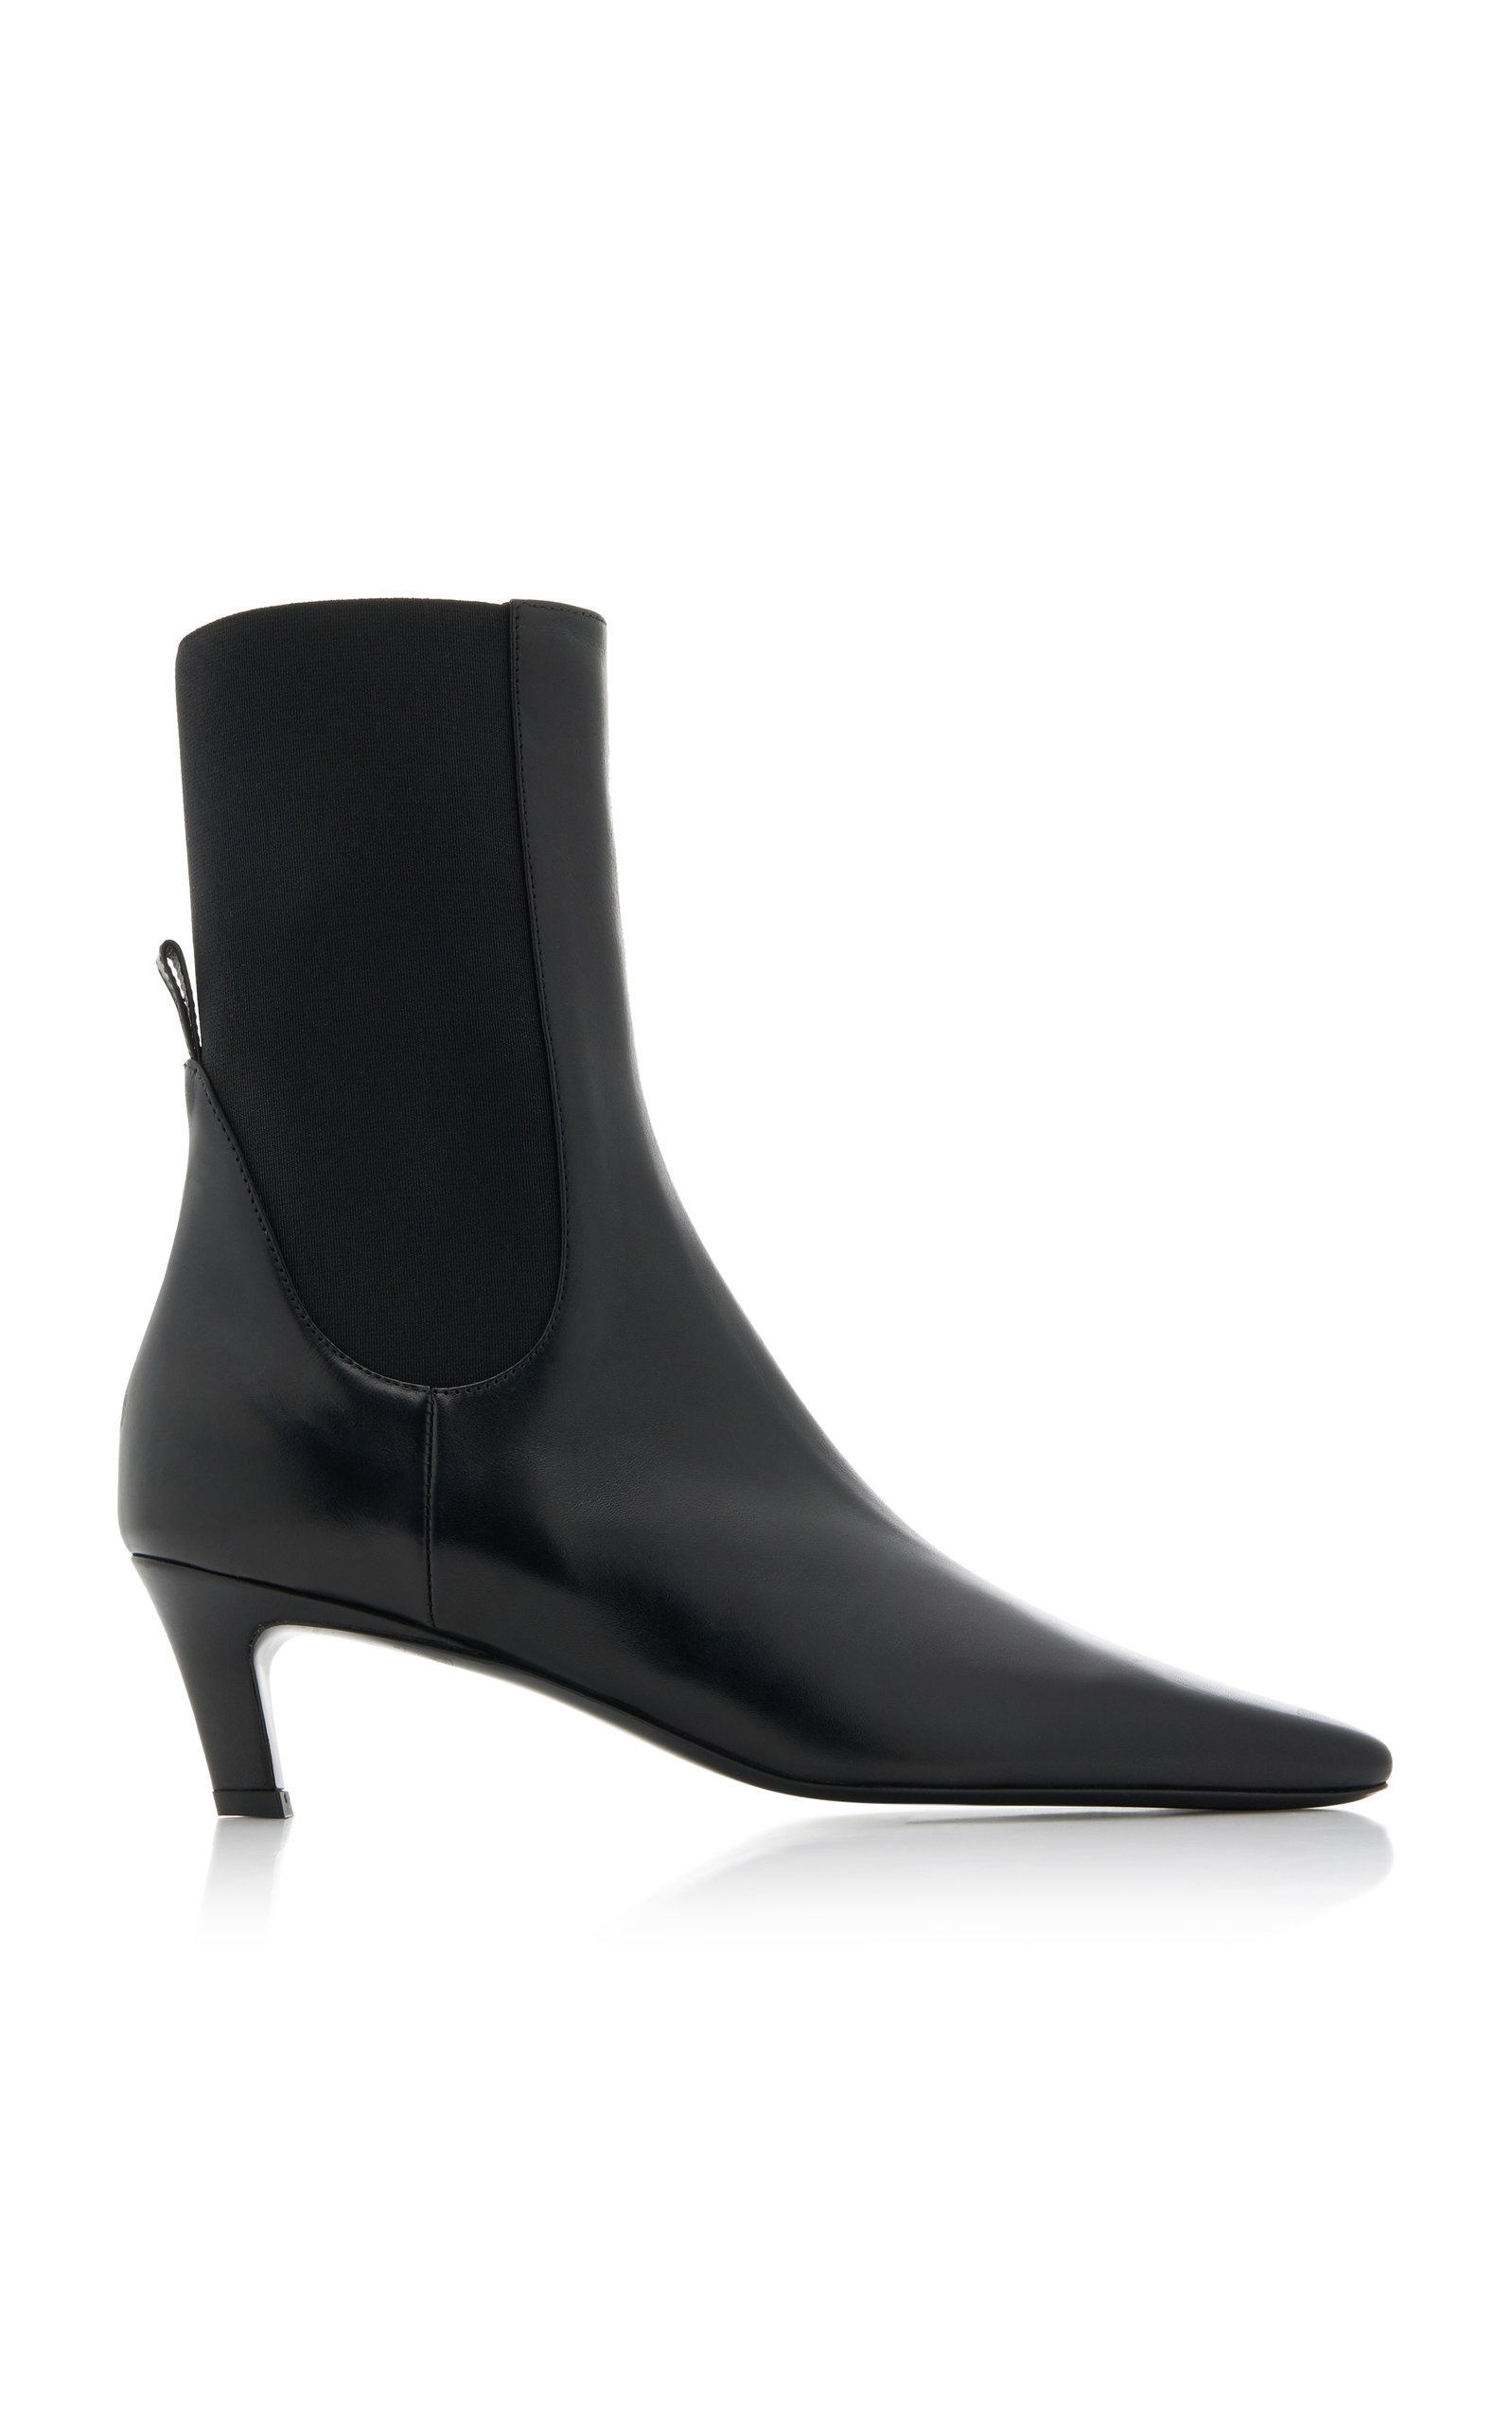 The Mid Heel Leather Boots black - 1